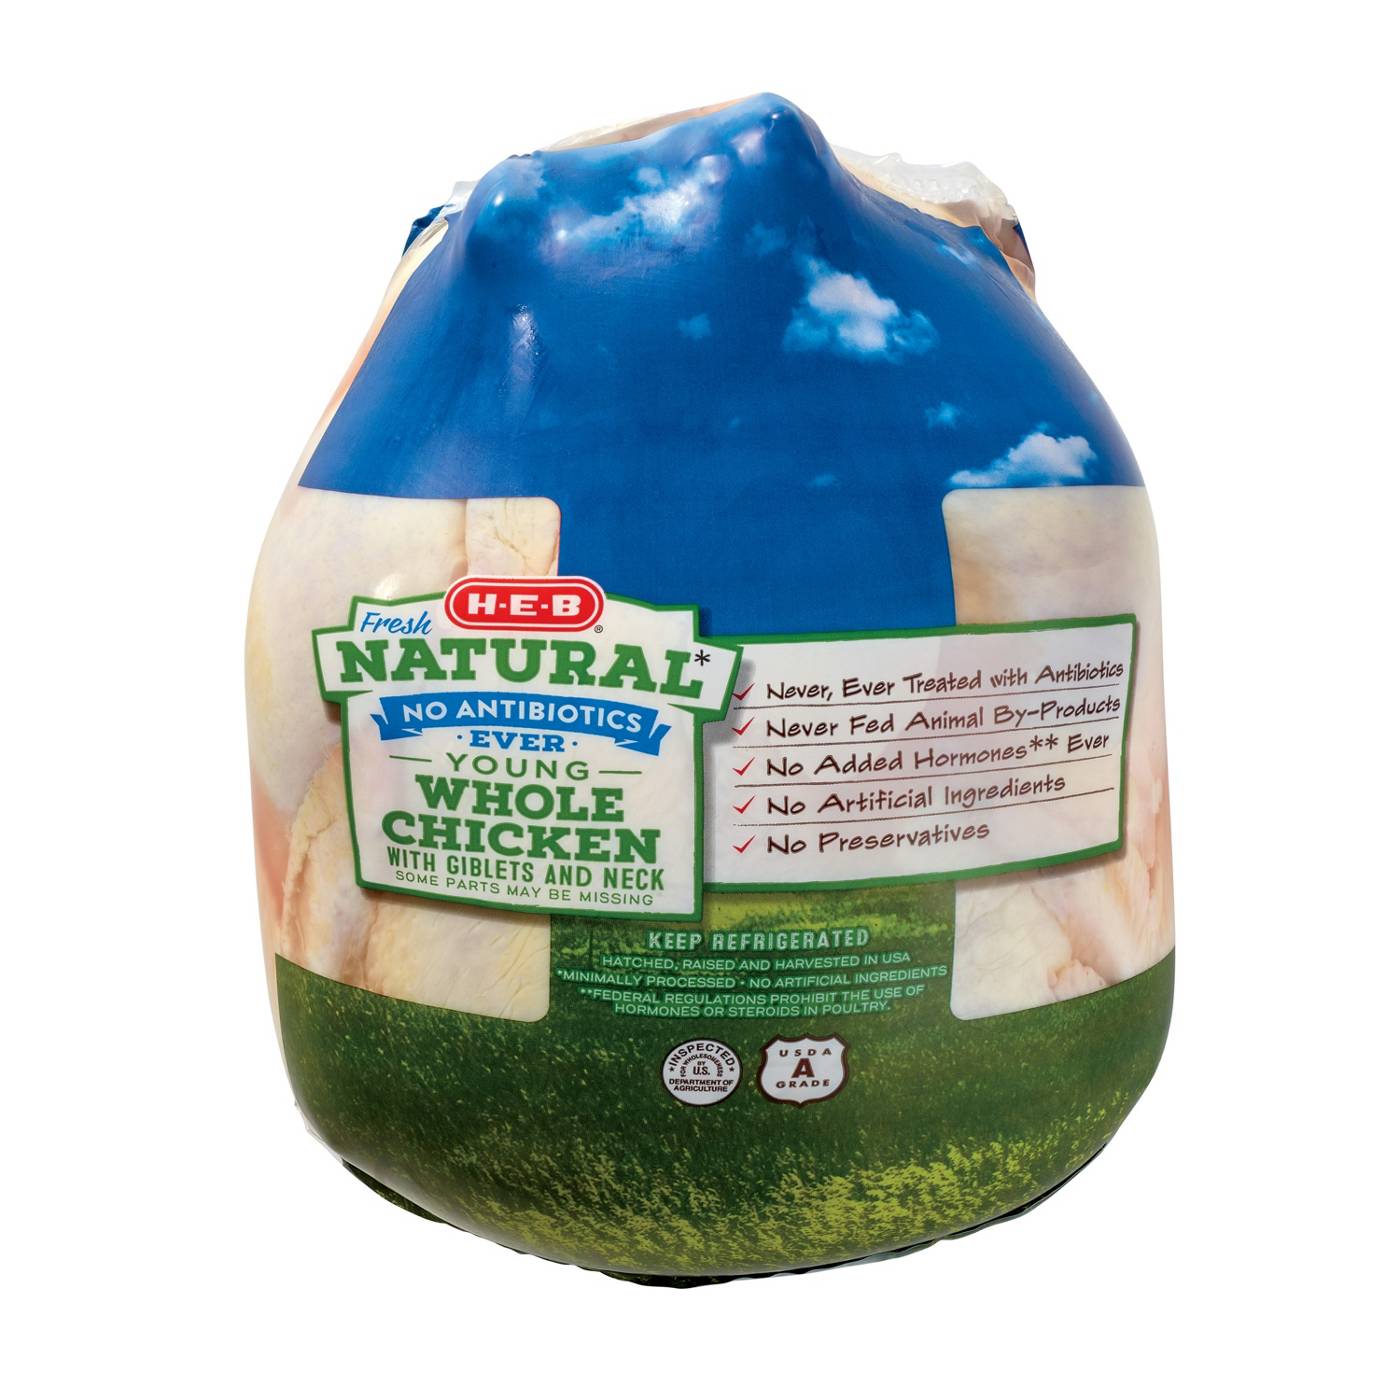 H-E-B Natural Fresh Whole Chicken; image 1 of 3